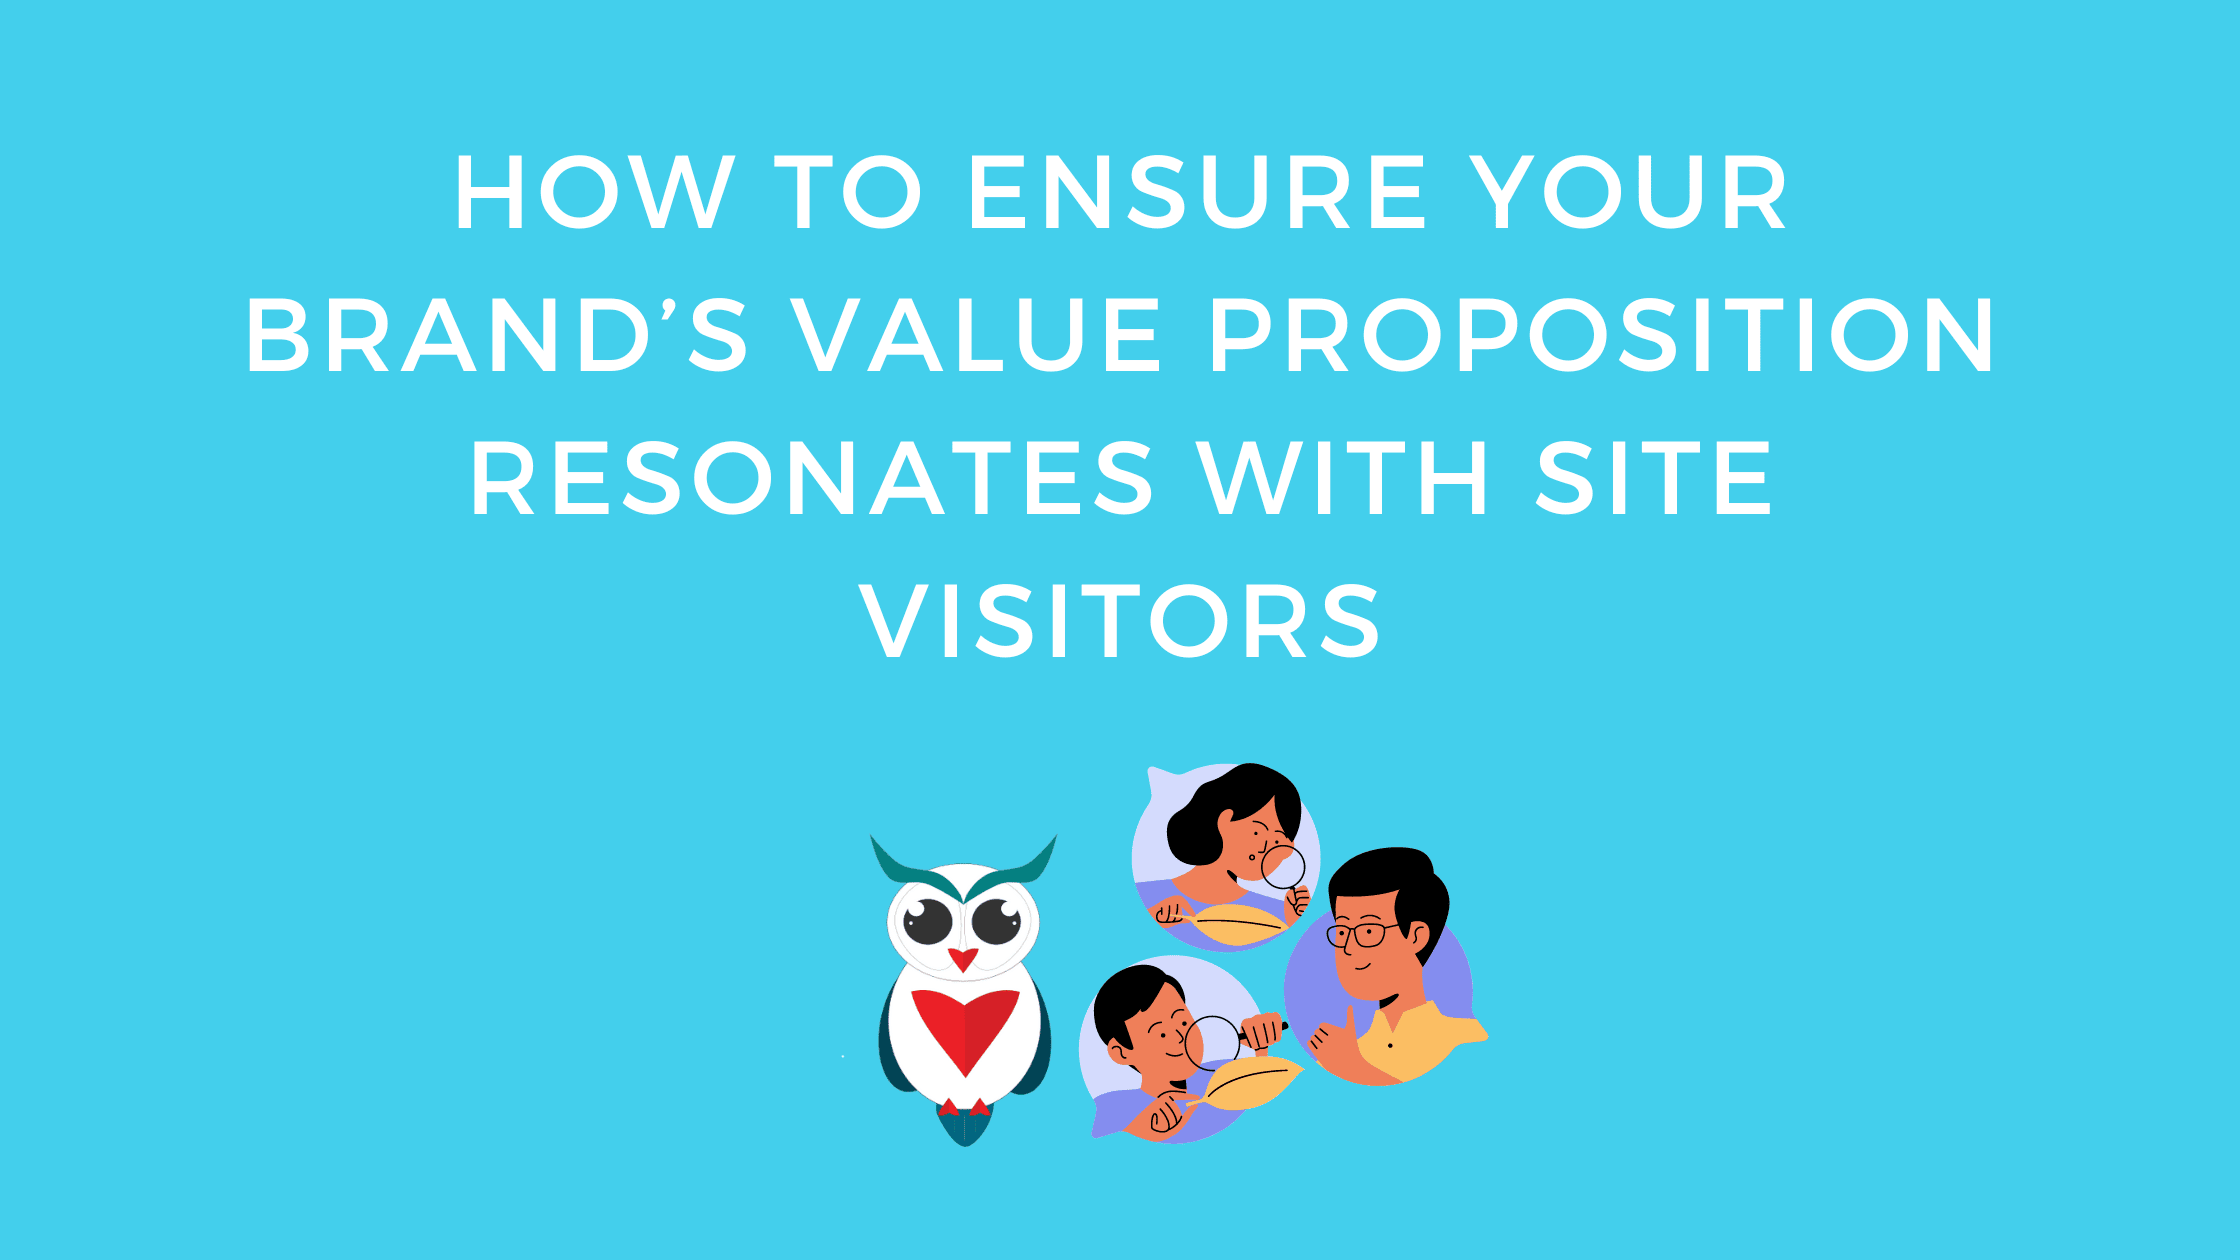 Ensure Your Brand Value Proposition Resonates with Site Visitors